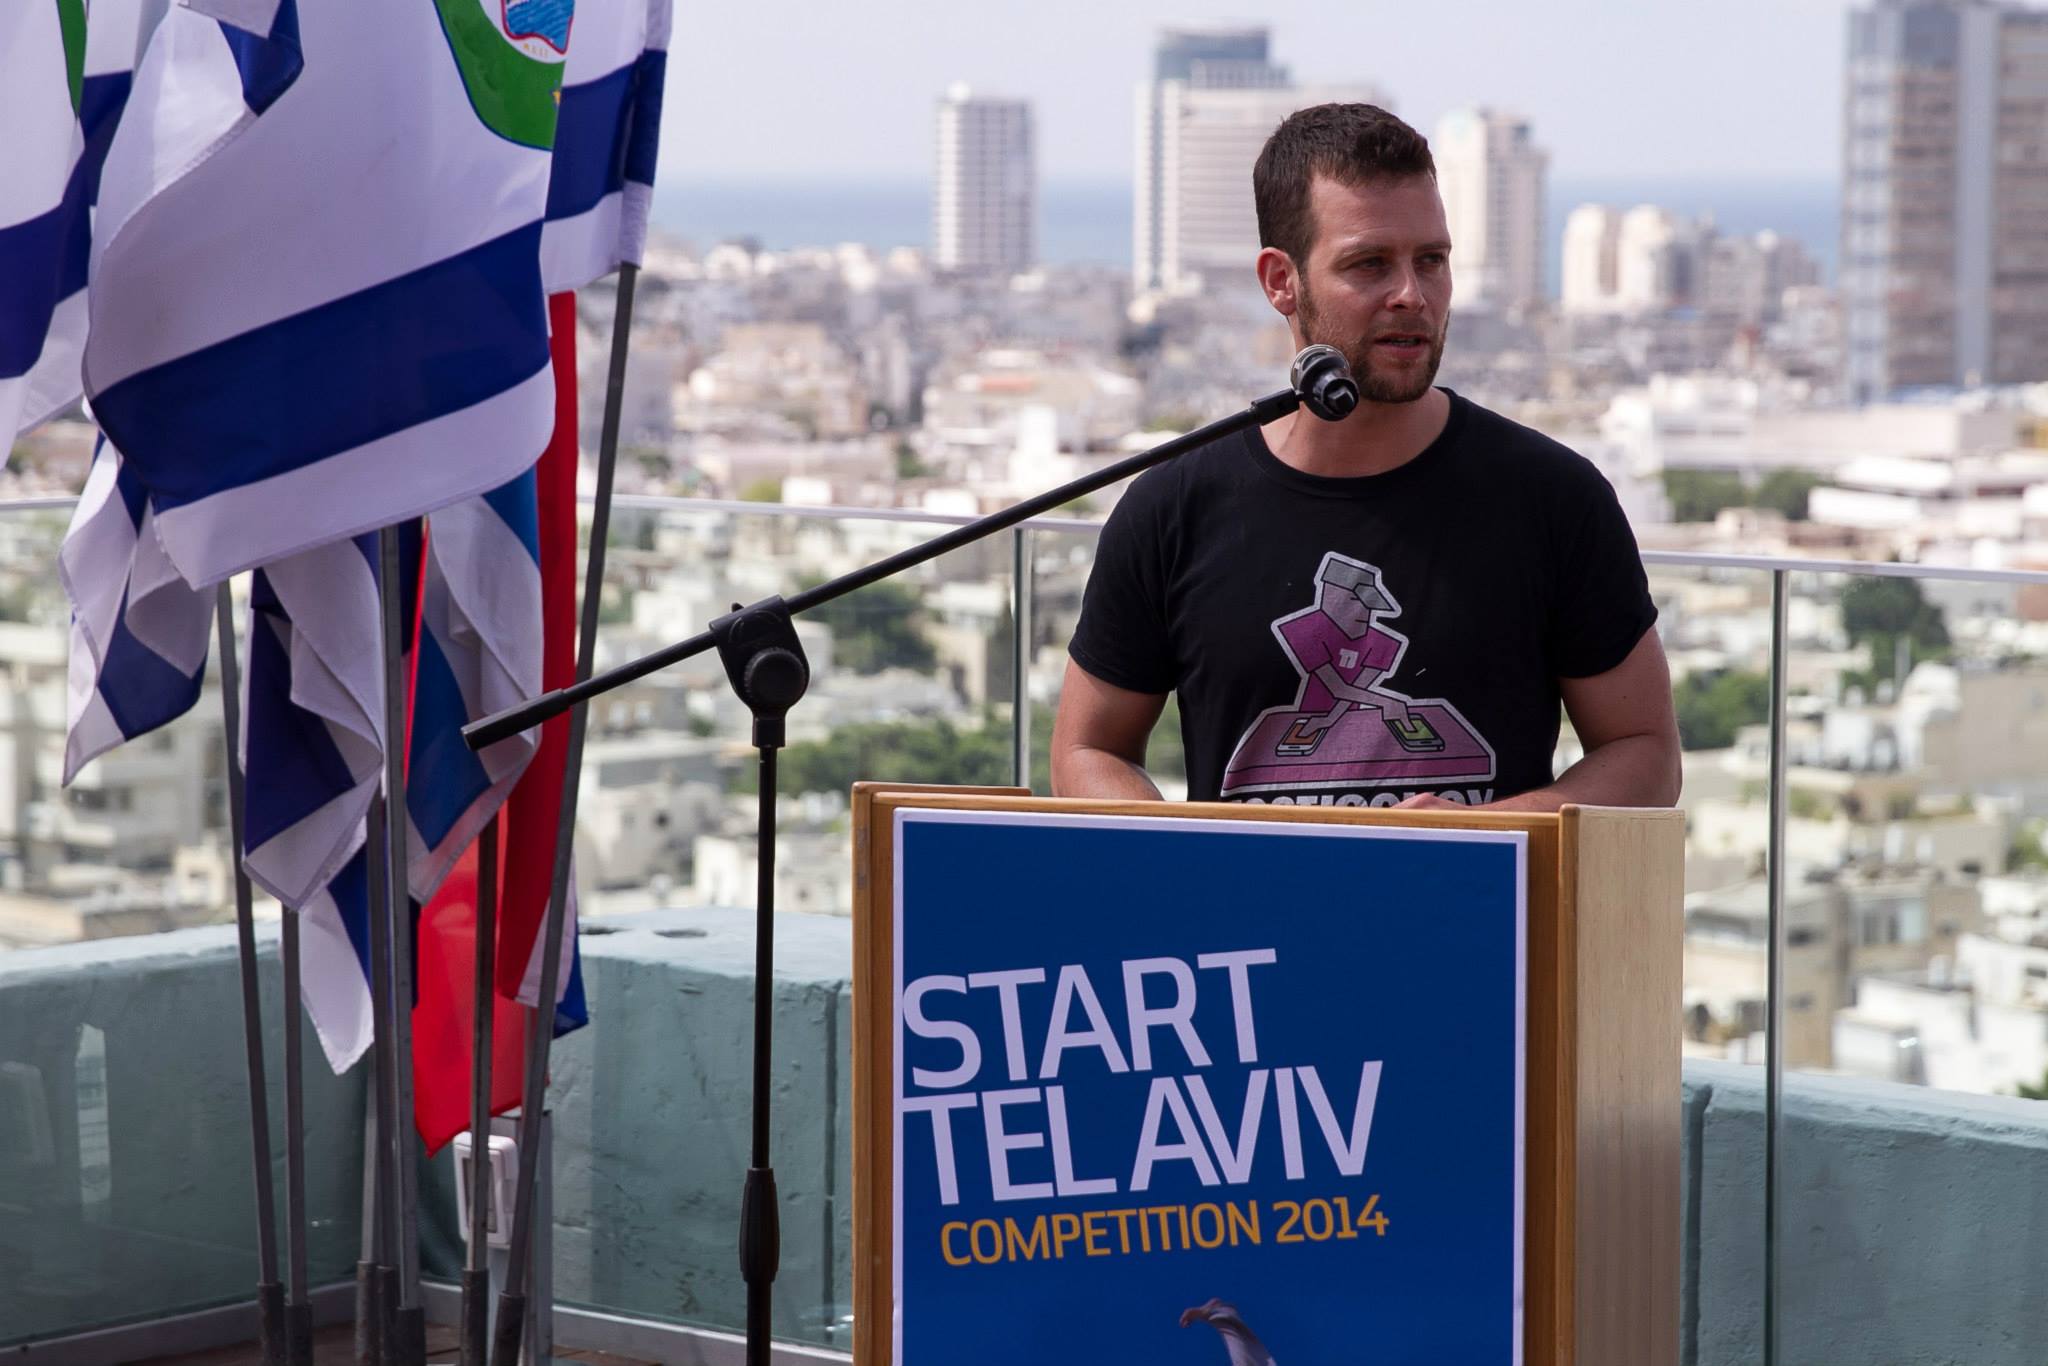 “Startup people in Tel Aviv in general are very open-minded and helpful”: Interview with CEO and Co-Founder of TestJockey Peter Vidos, on his week at Start Tel Aviv